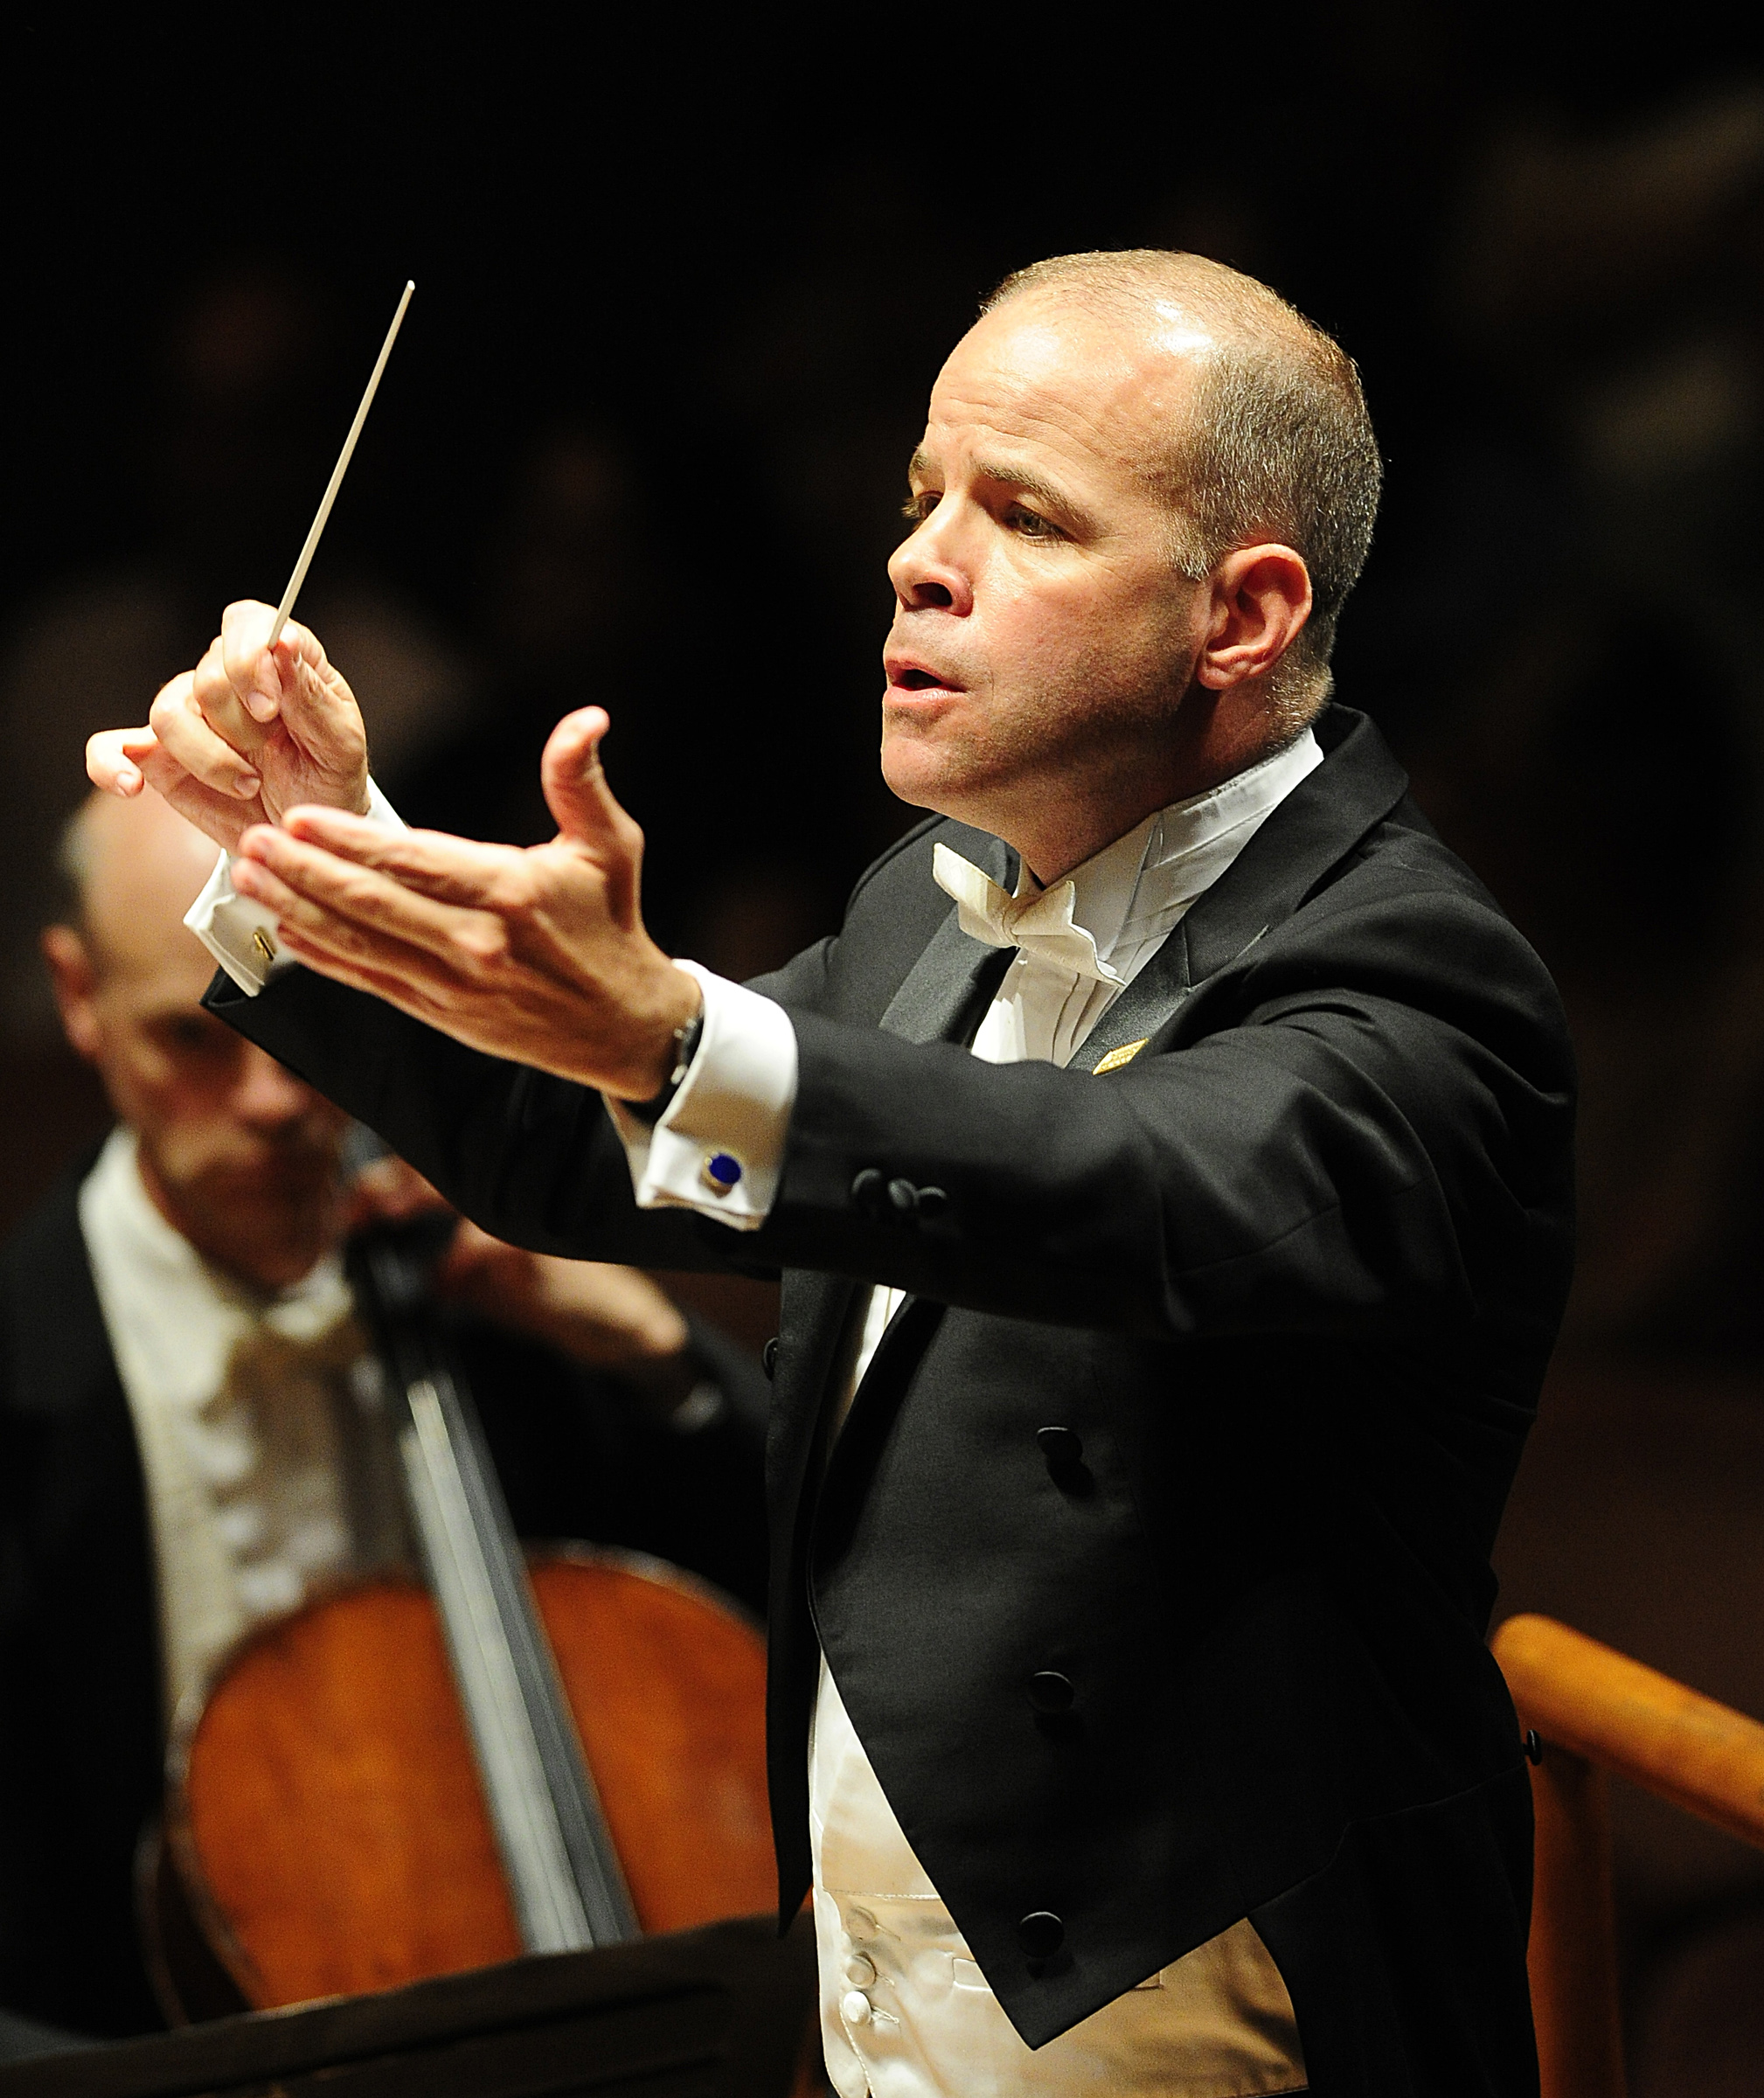 Conductor Eric Stark will lead a performance of Benjamin Britten’s “War Reqiuem” on May 3.